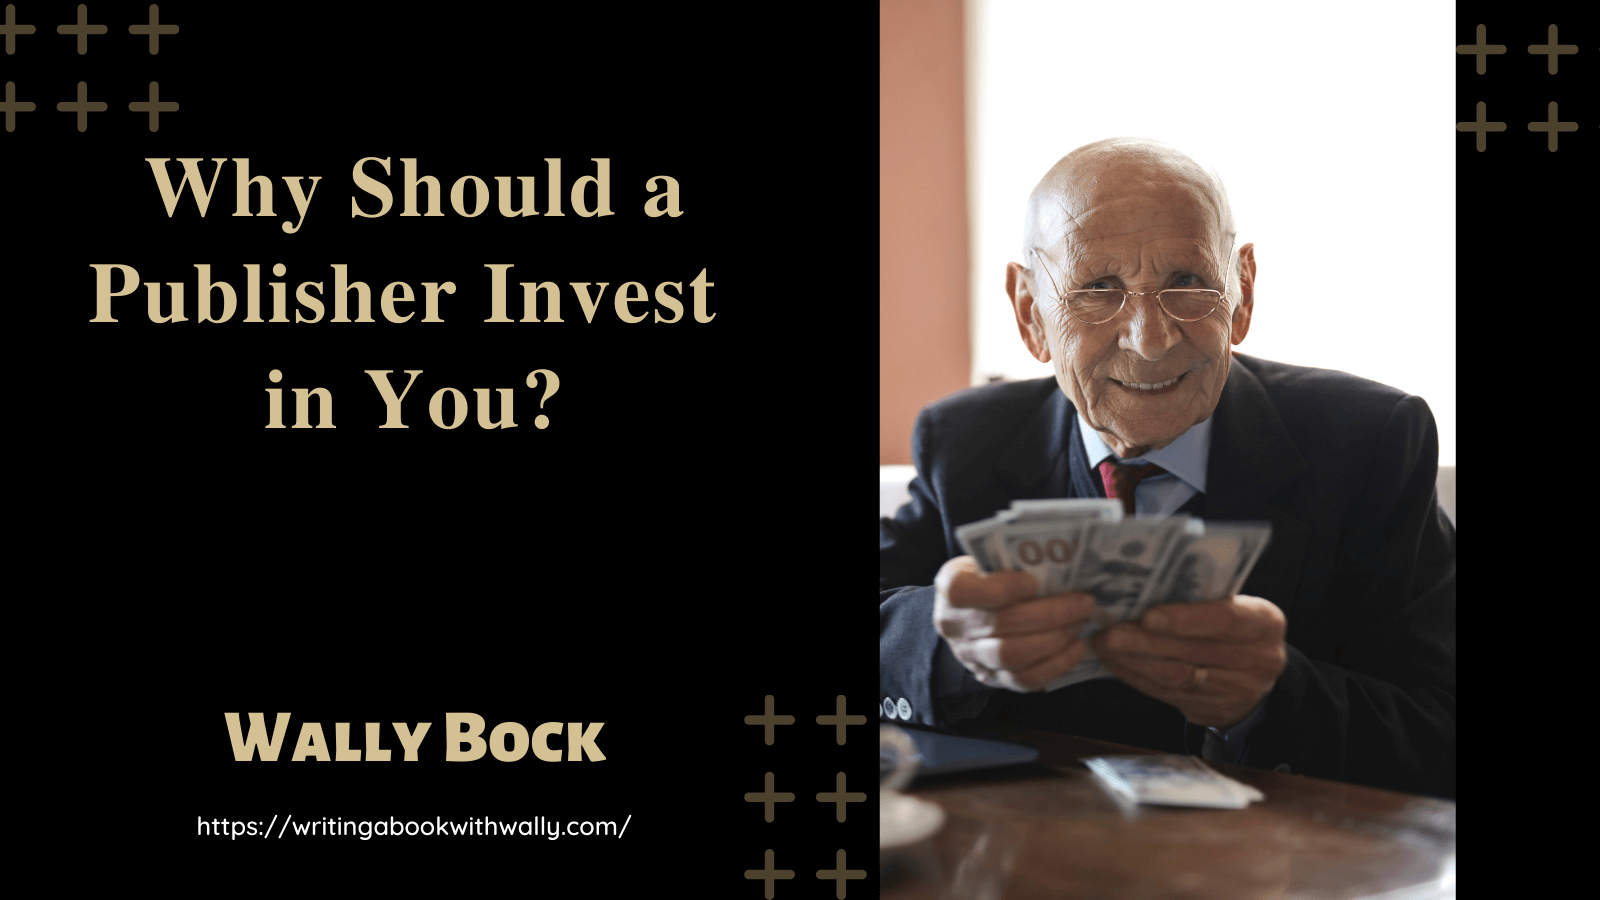 Why should a publisher invest in you?